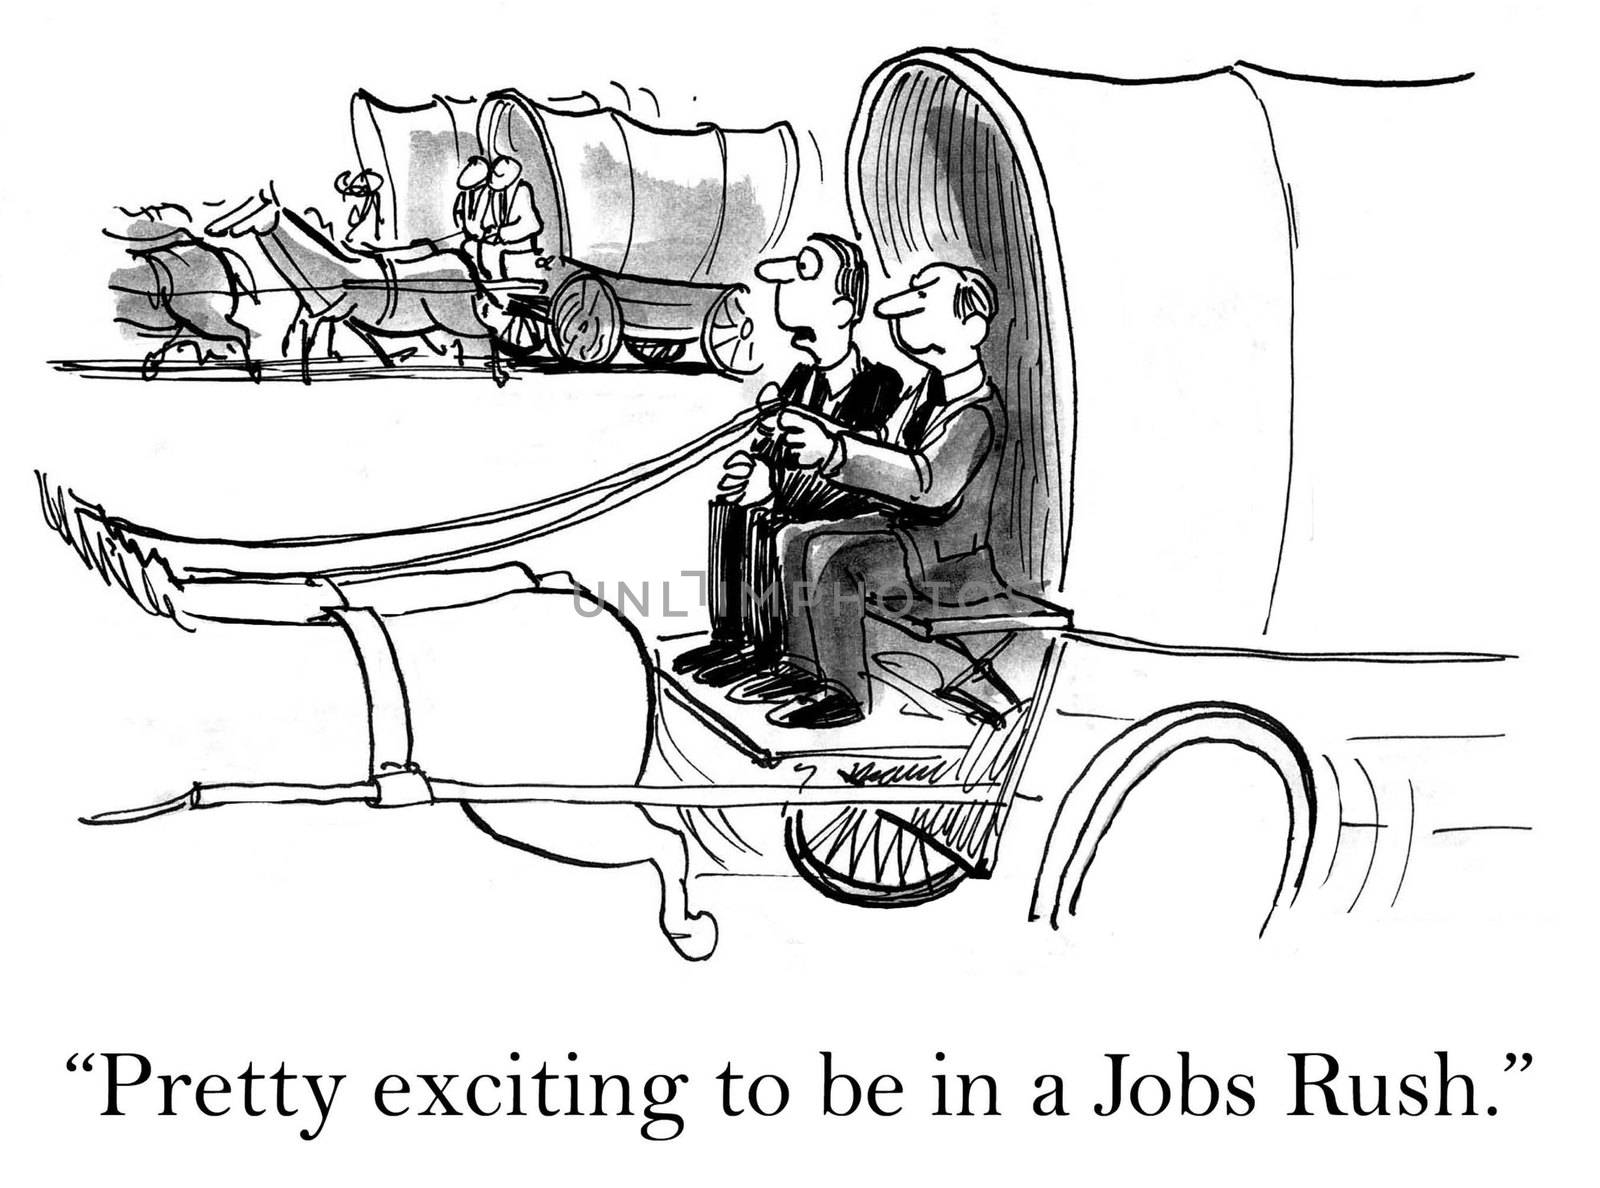 "Pretty exciting to be in a jobs rush."